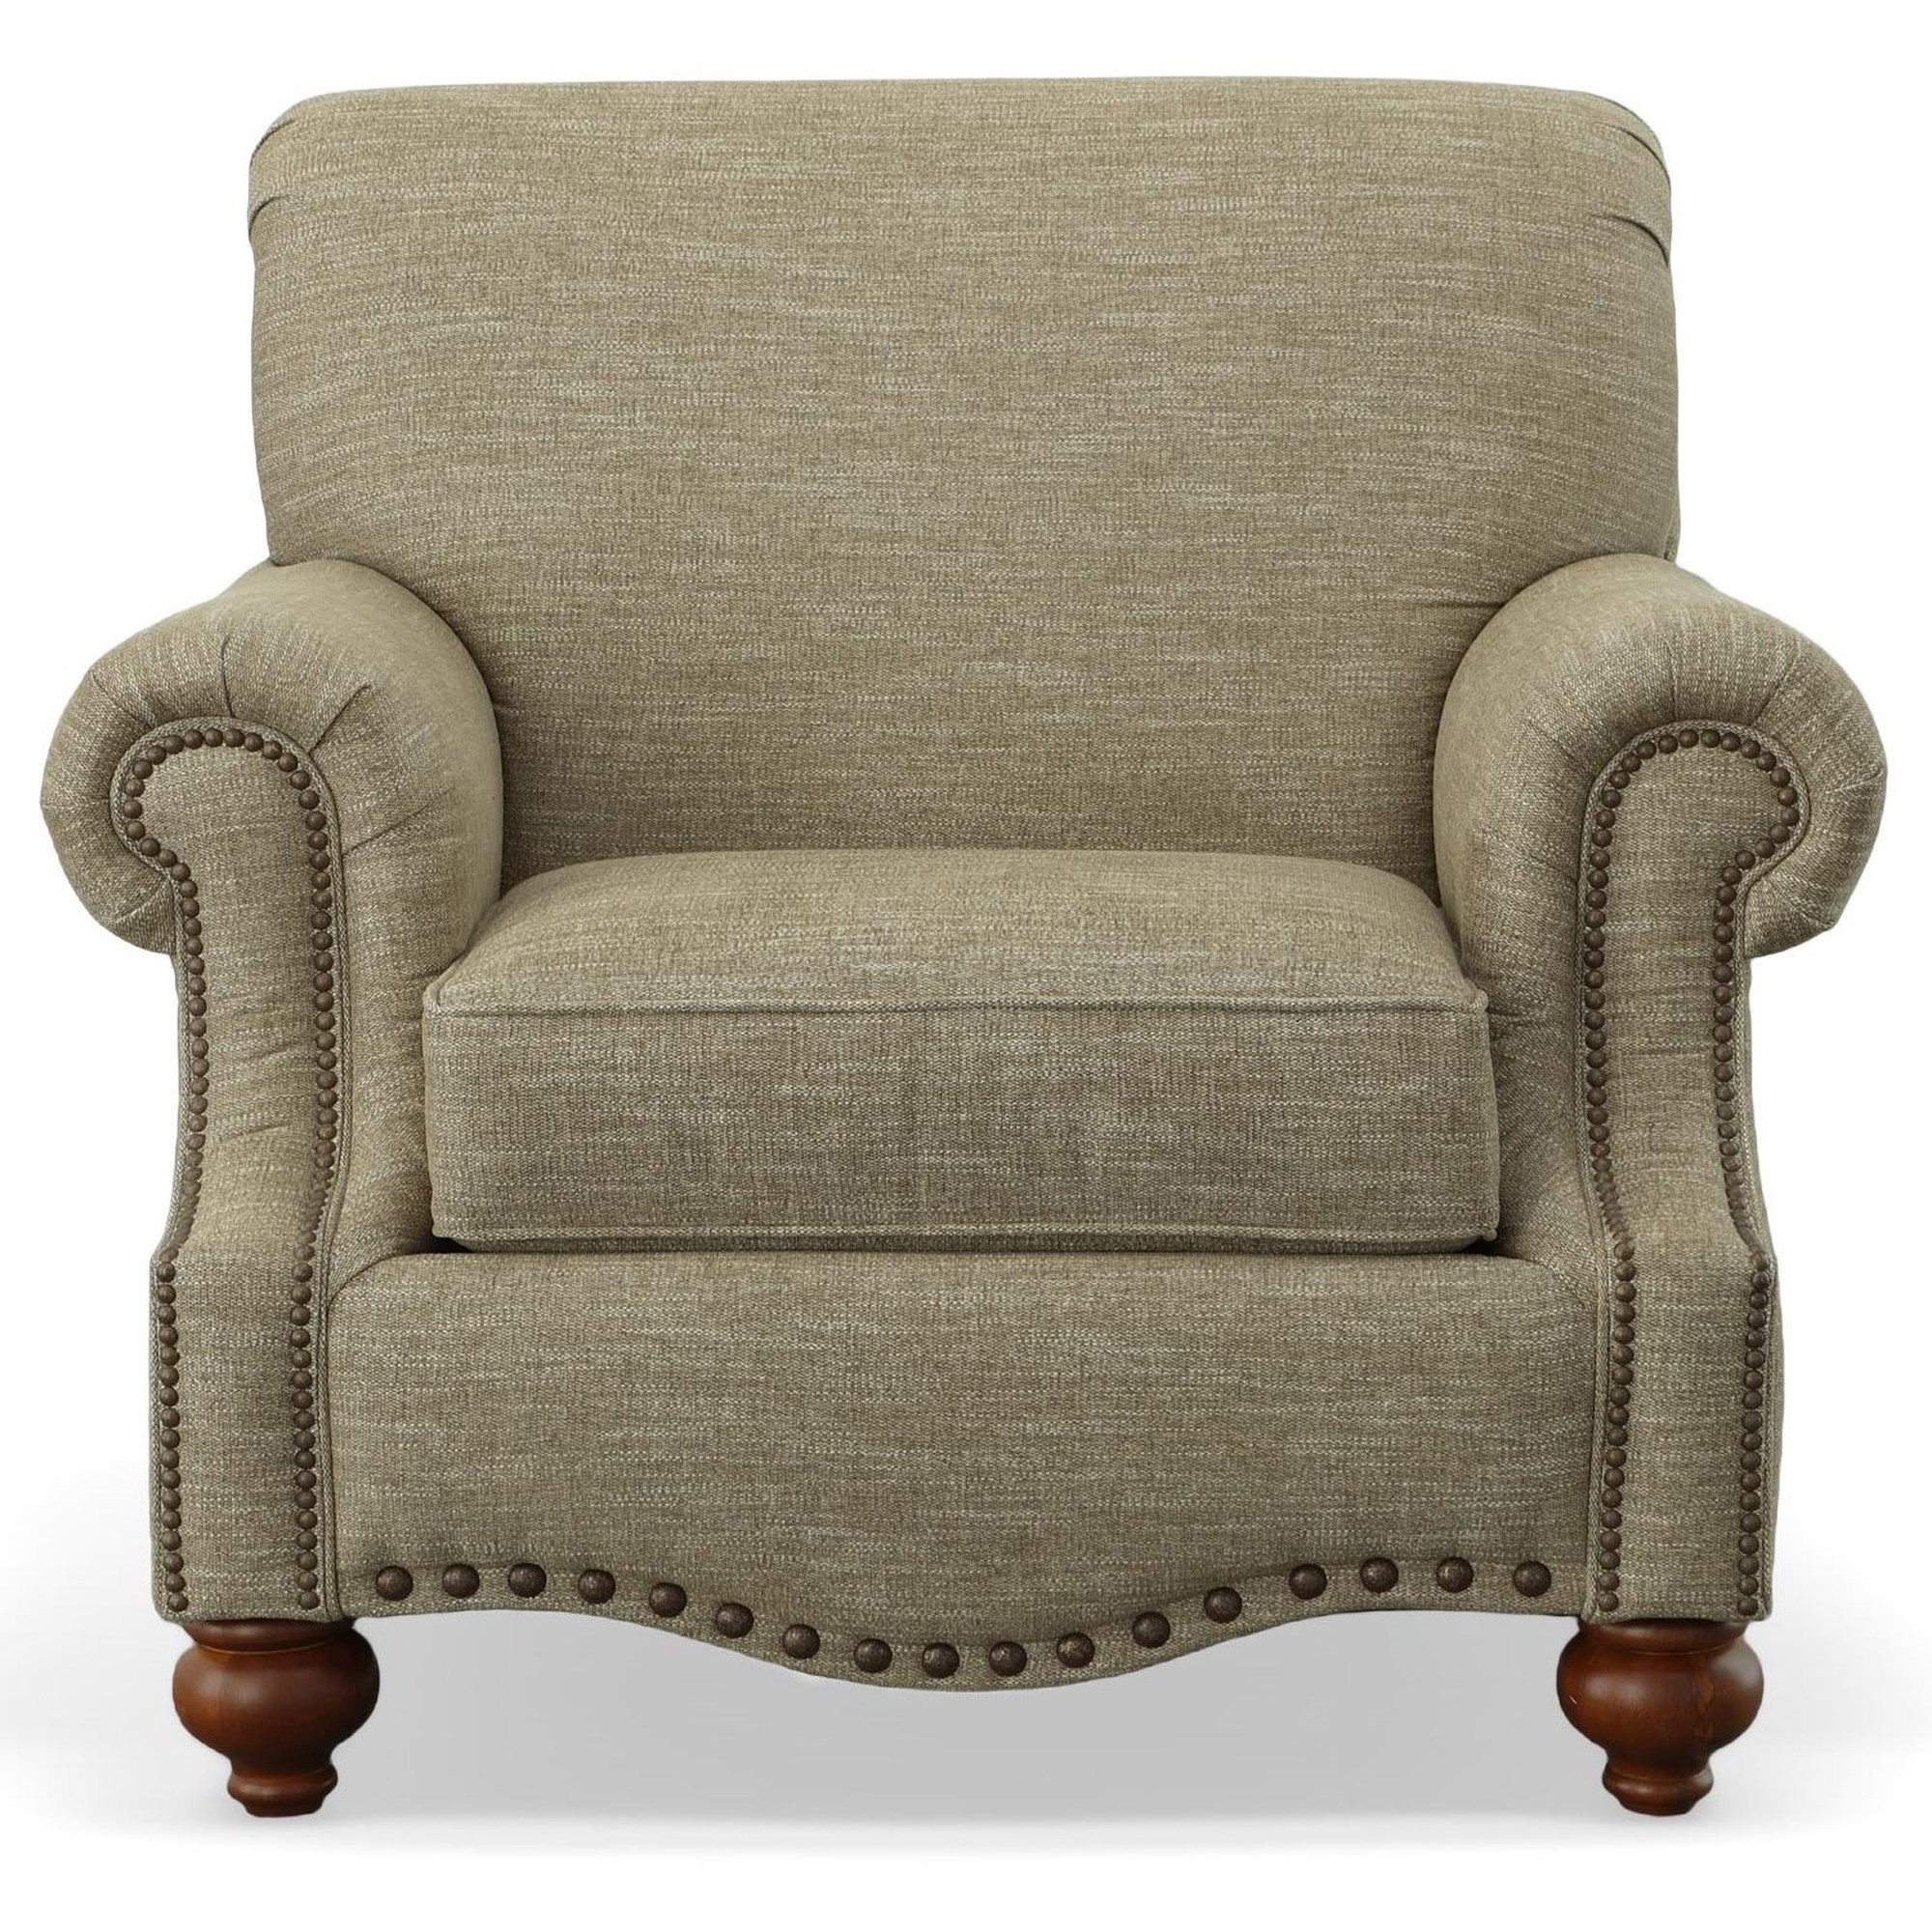 | Decor Club | Chair Home with Chairs Rolled 2697-12-1579-18M Hunt Traditional Furnishings Esprit Bassett Arms Upholstered